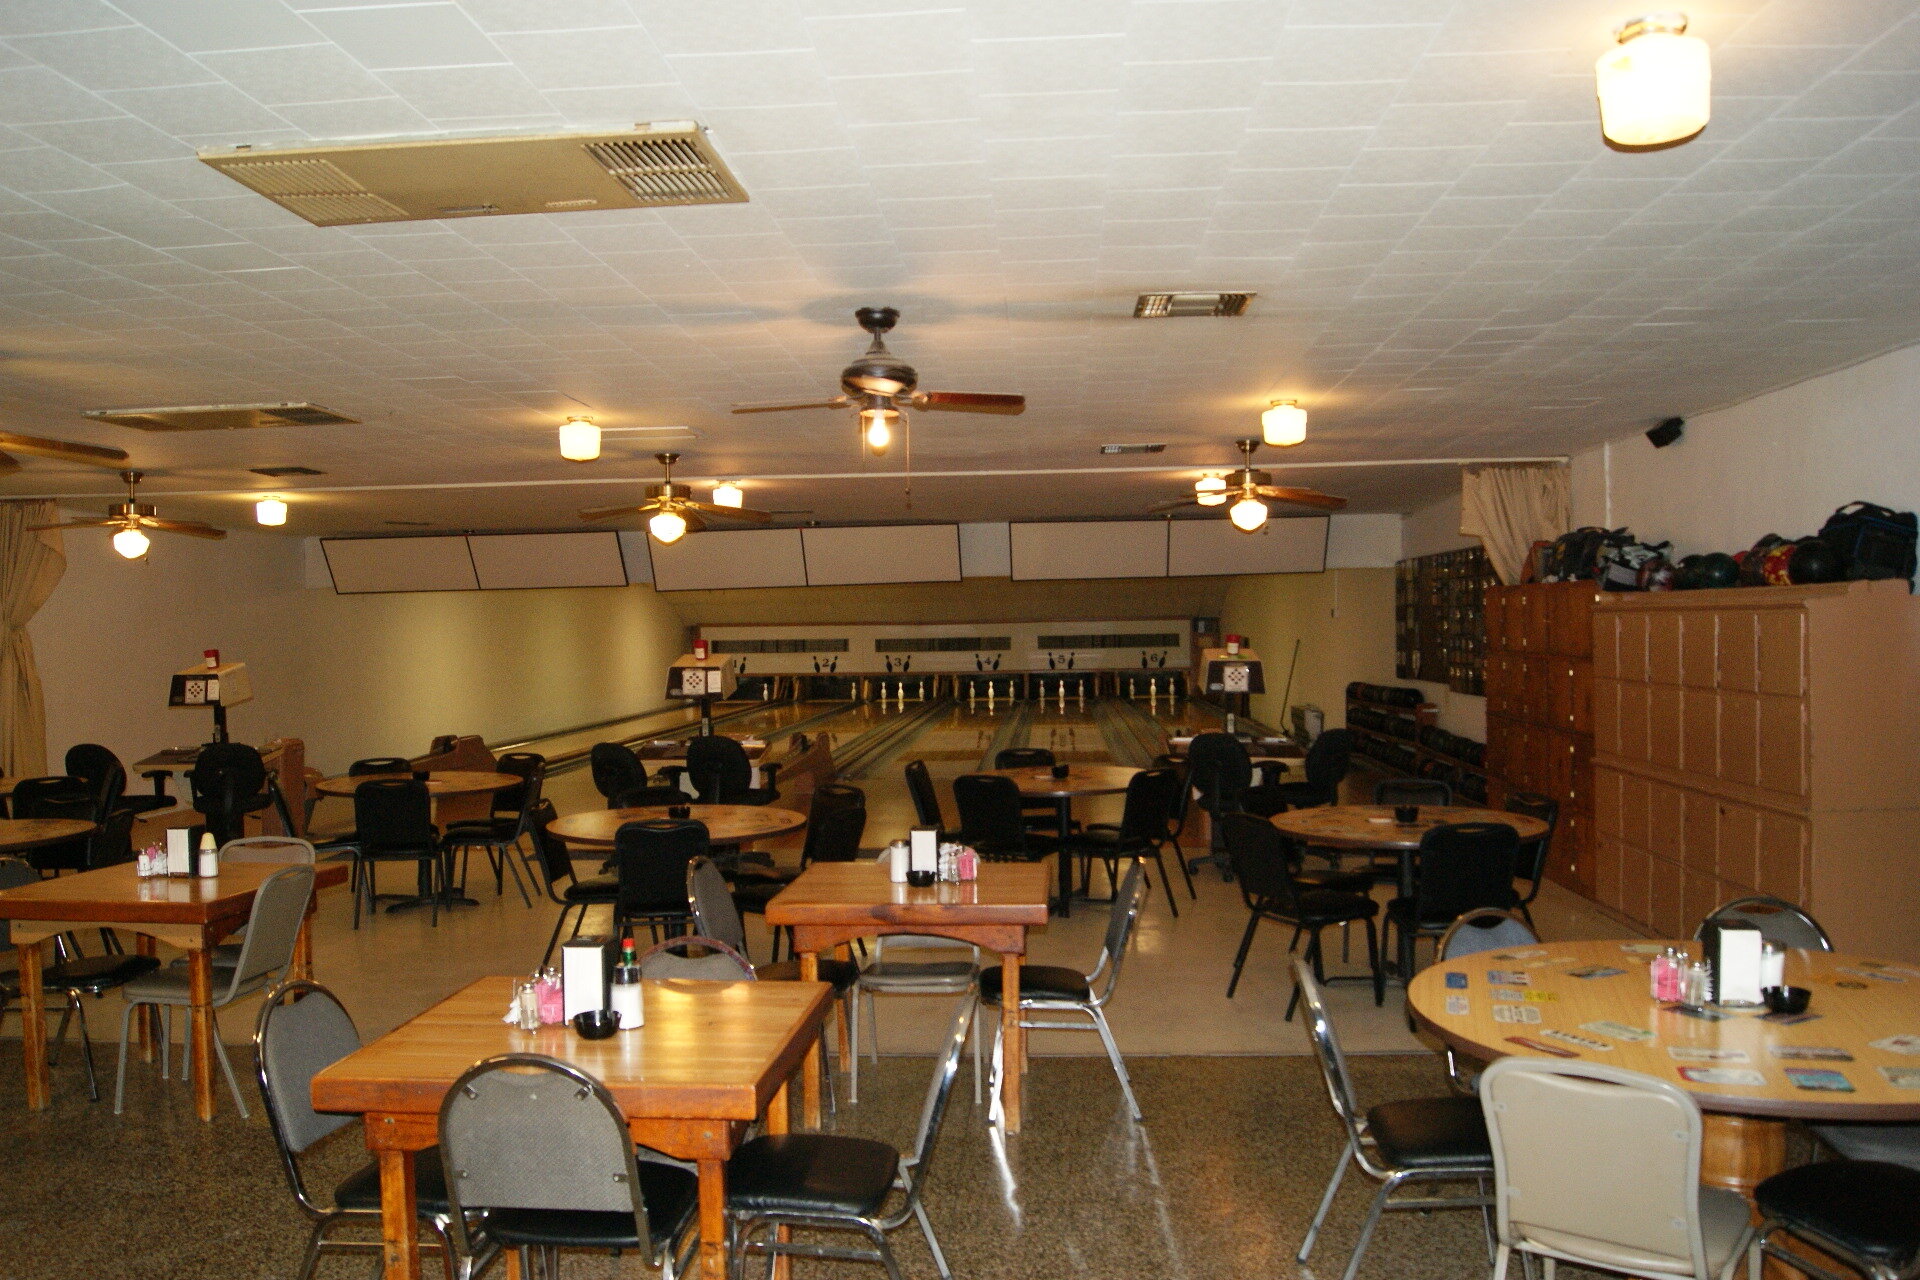 Bowling alley dining room in afternoon.JPG